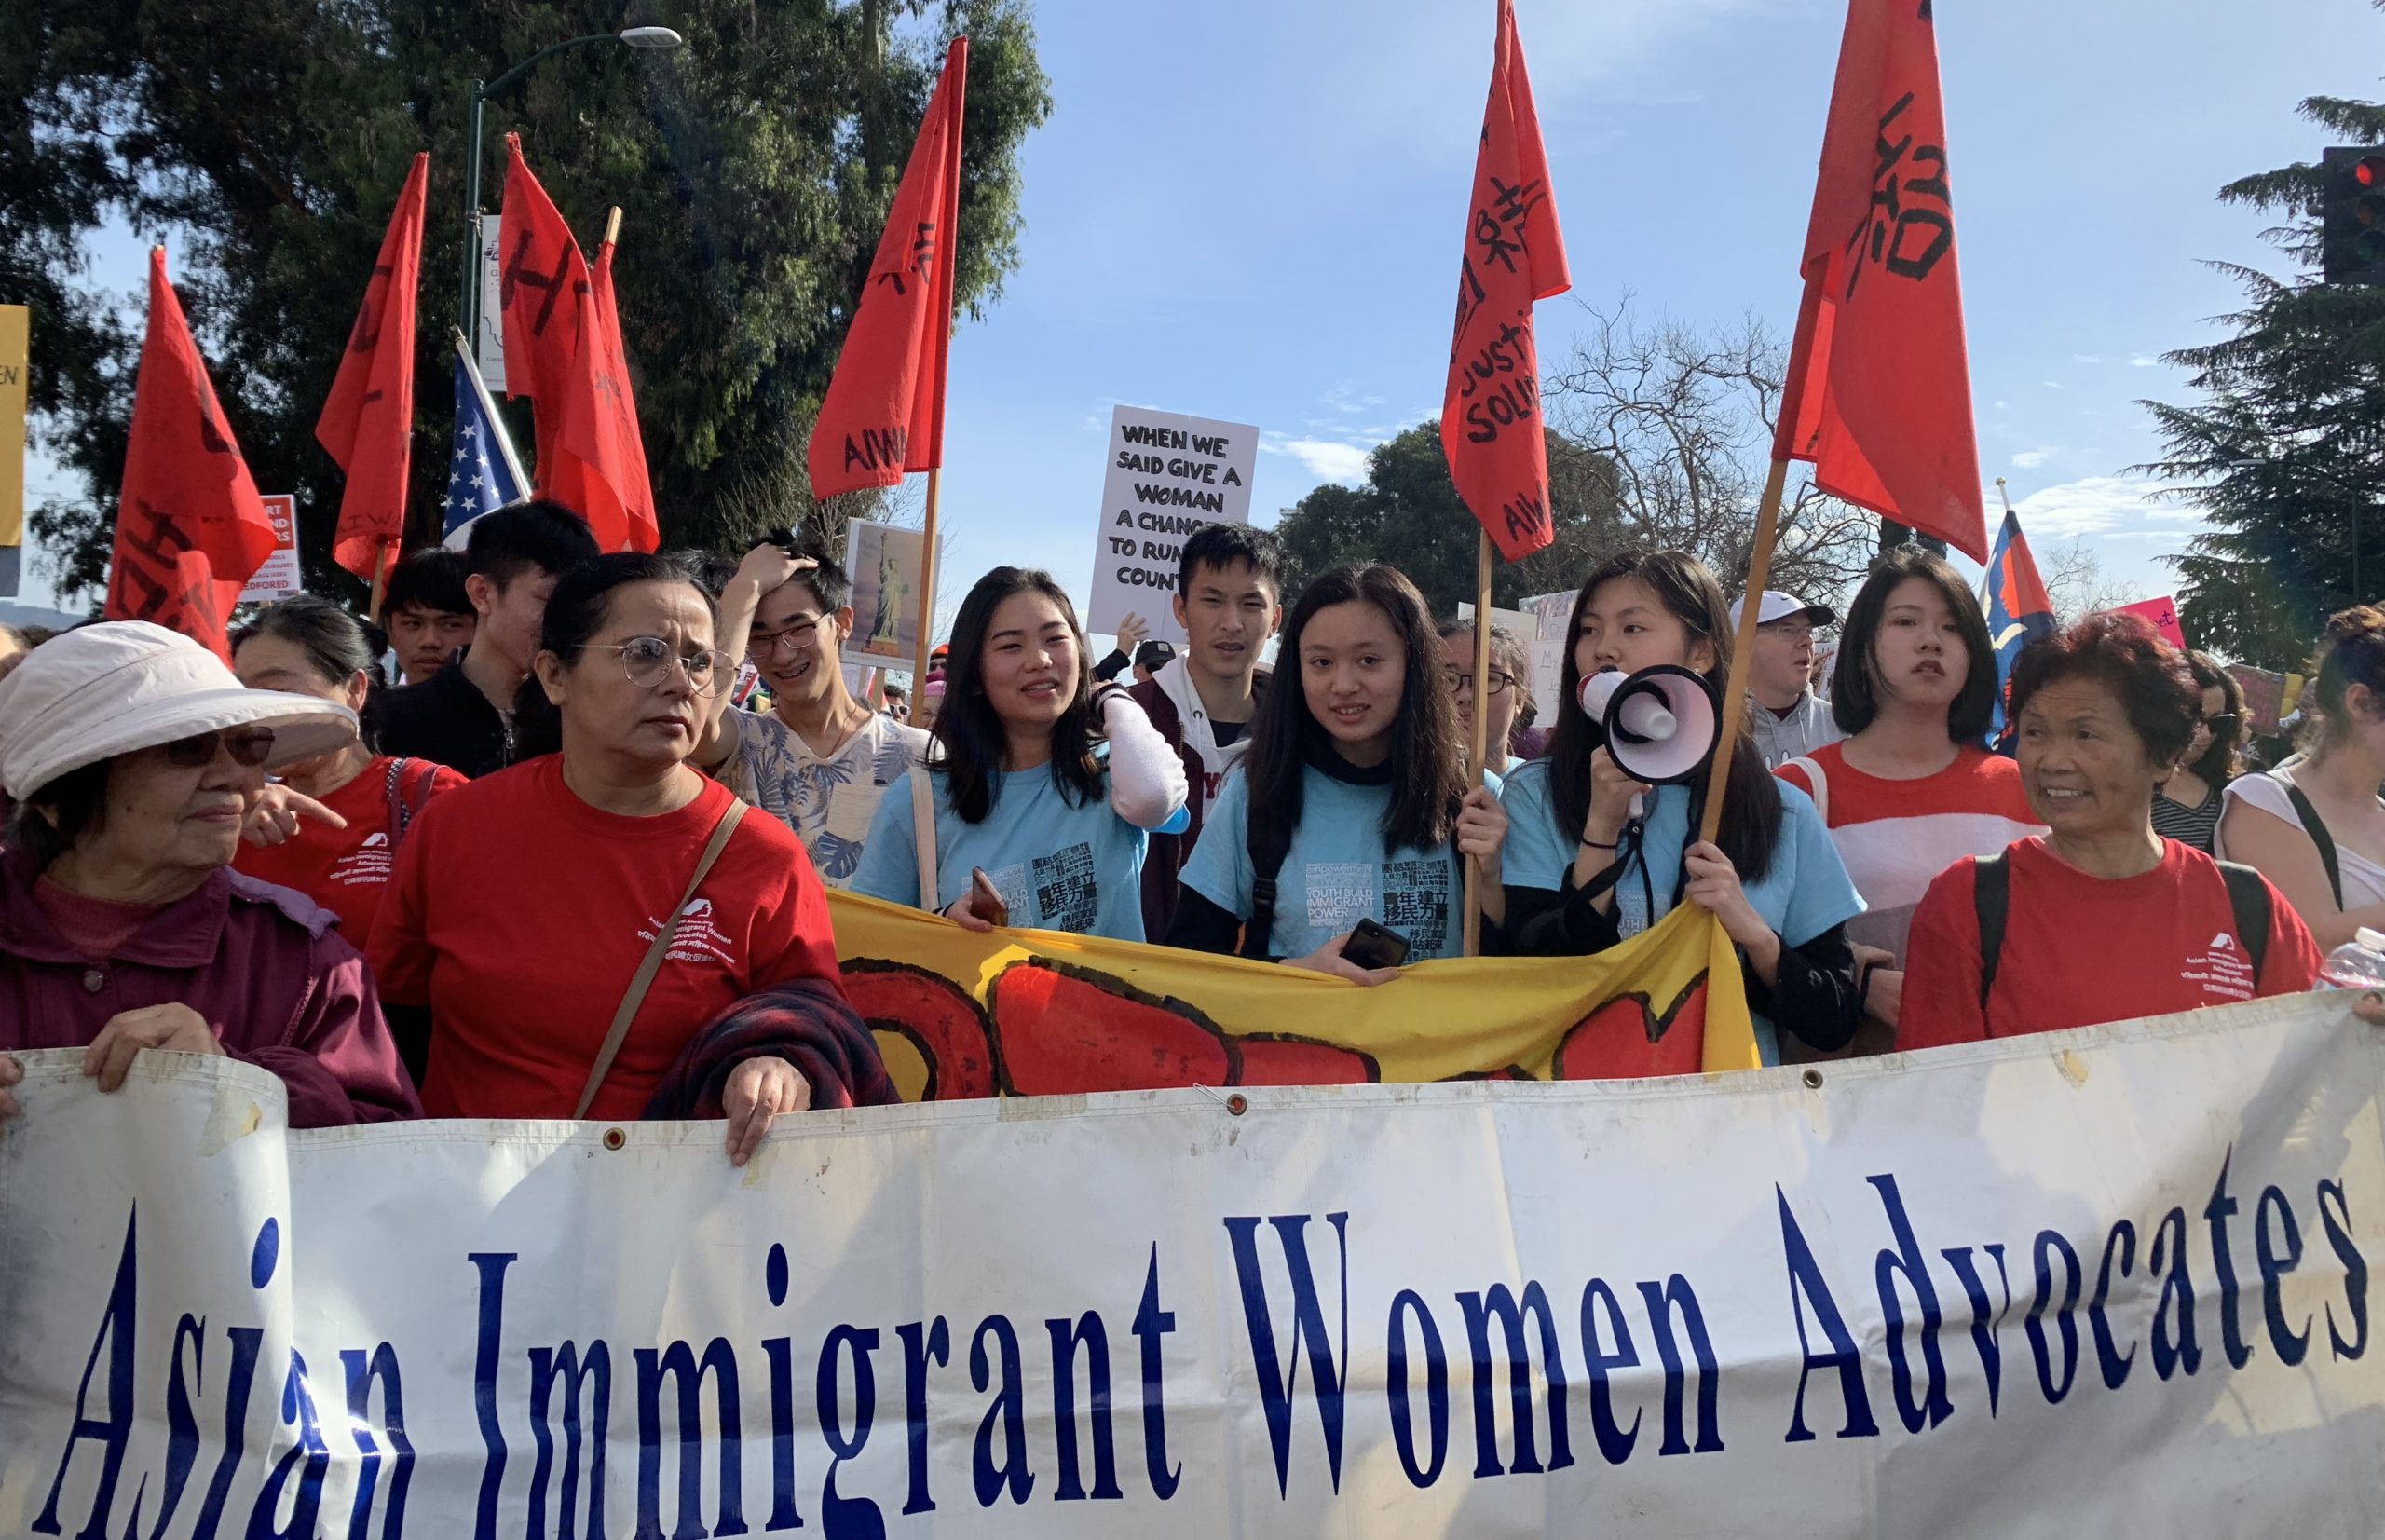 Supporting the Leadership and Agency of Asian Immigrant Women